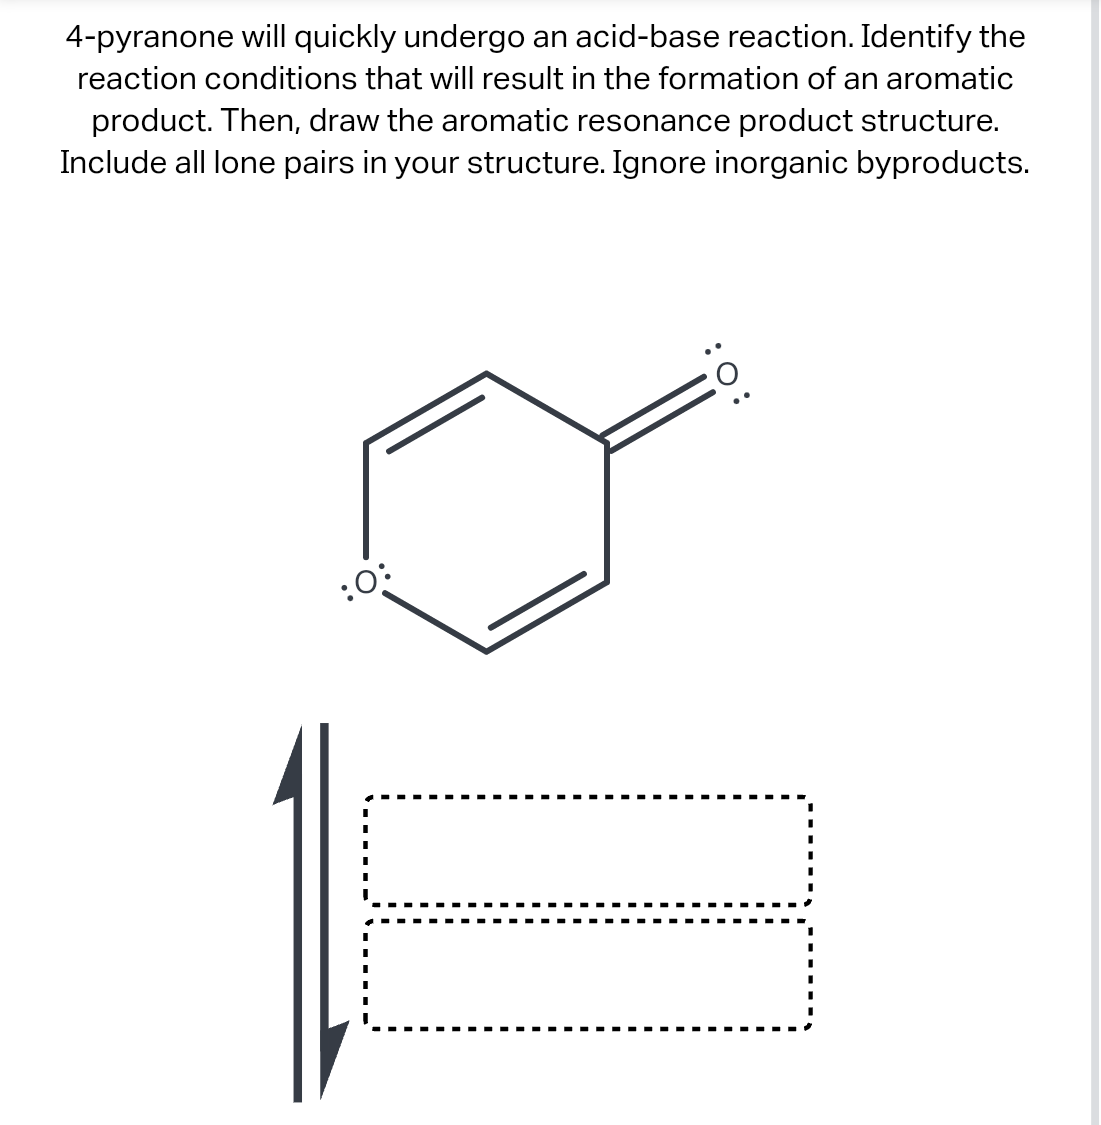 4-pyranone will quickly undergo an acid-base reaction. Identify the
reaction conditions that will result in the formation of an aromatic
product. Then, draw the aromatic resonance product structure.
Include all lone pairs in your structure. Ignore inorganic byproducts.
:0:
:O: